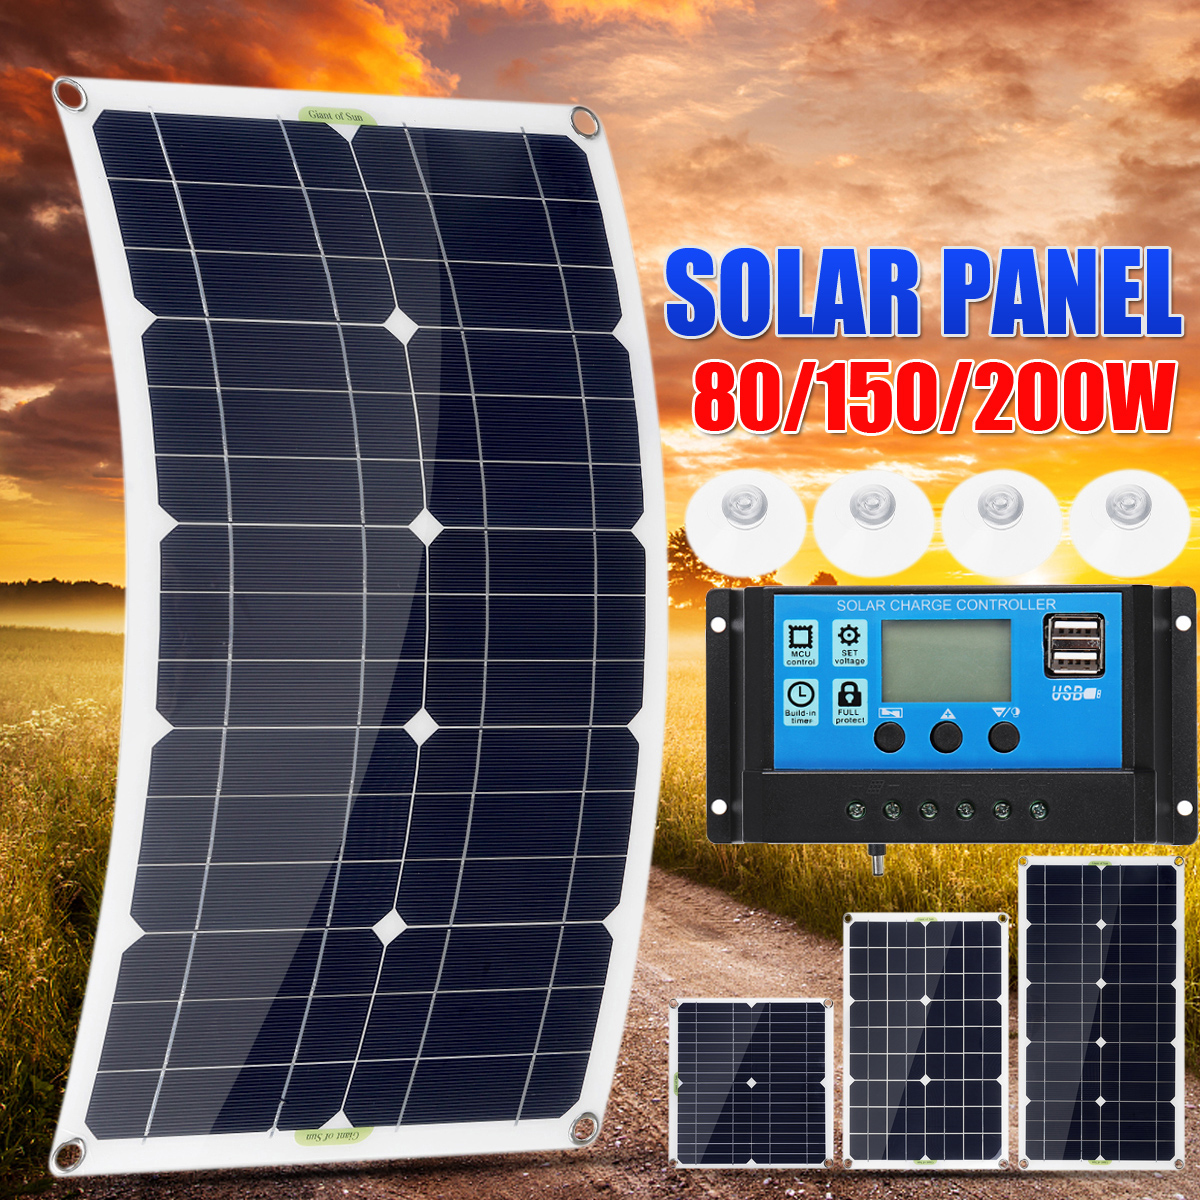 50W-Solar-Panel-Kit-18V-Battery-Charger-1020304050A-Controller-DCUSBTYPE-C-For-Outdoor-Camping-Acces-1780843-1